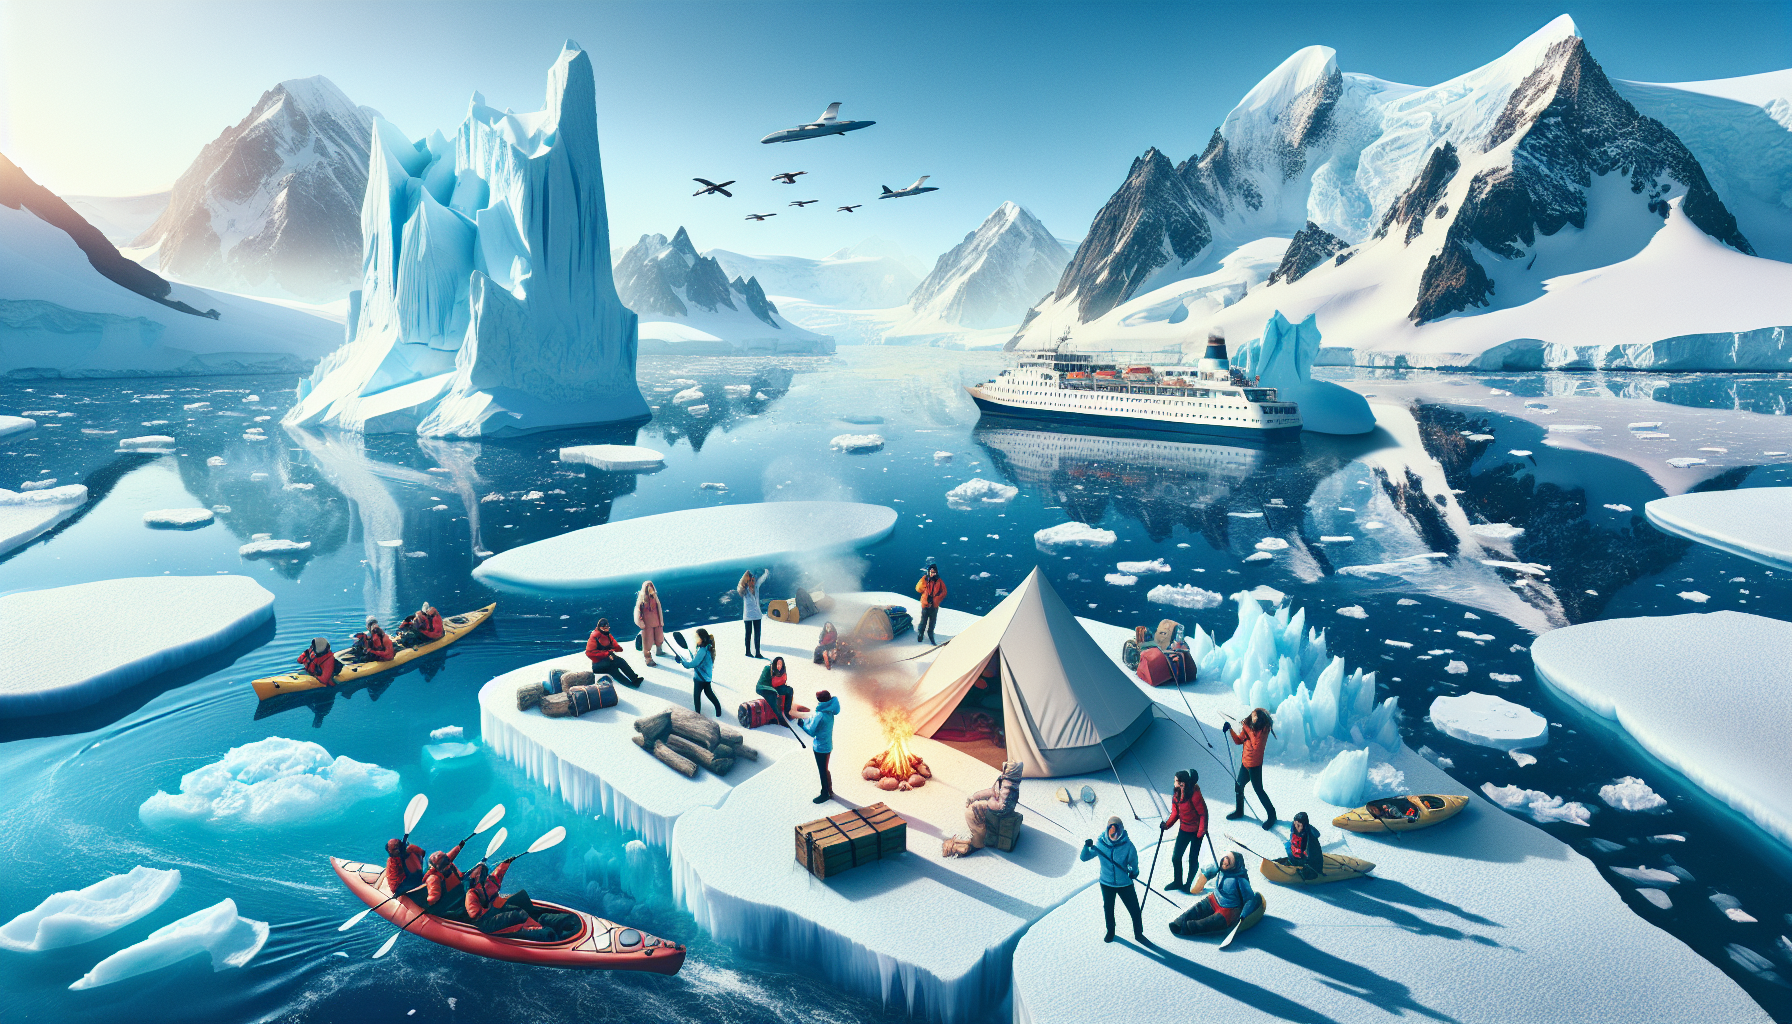 experience the ultimate adventure with antarctic travel and cruises. explore the stunning wilderness of antarctica through camping and kayaking for an unforgettable journey.